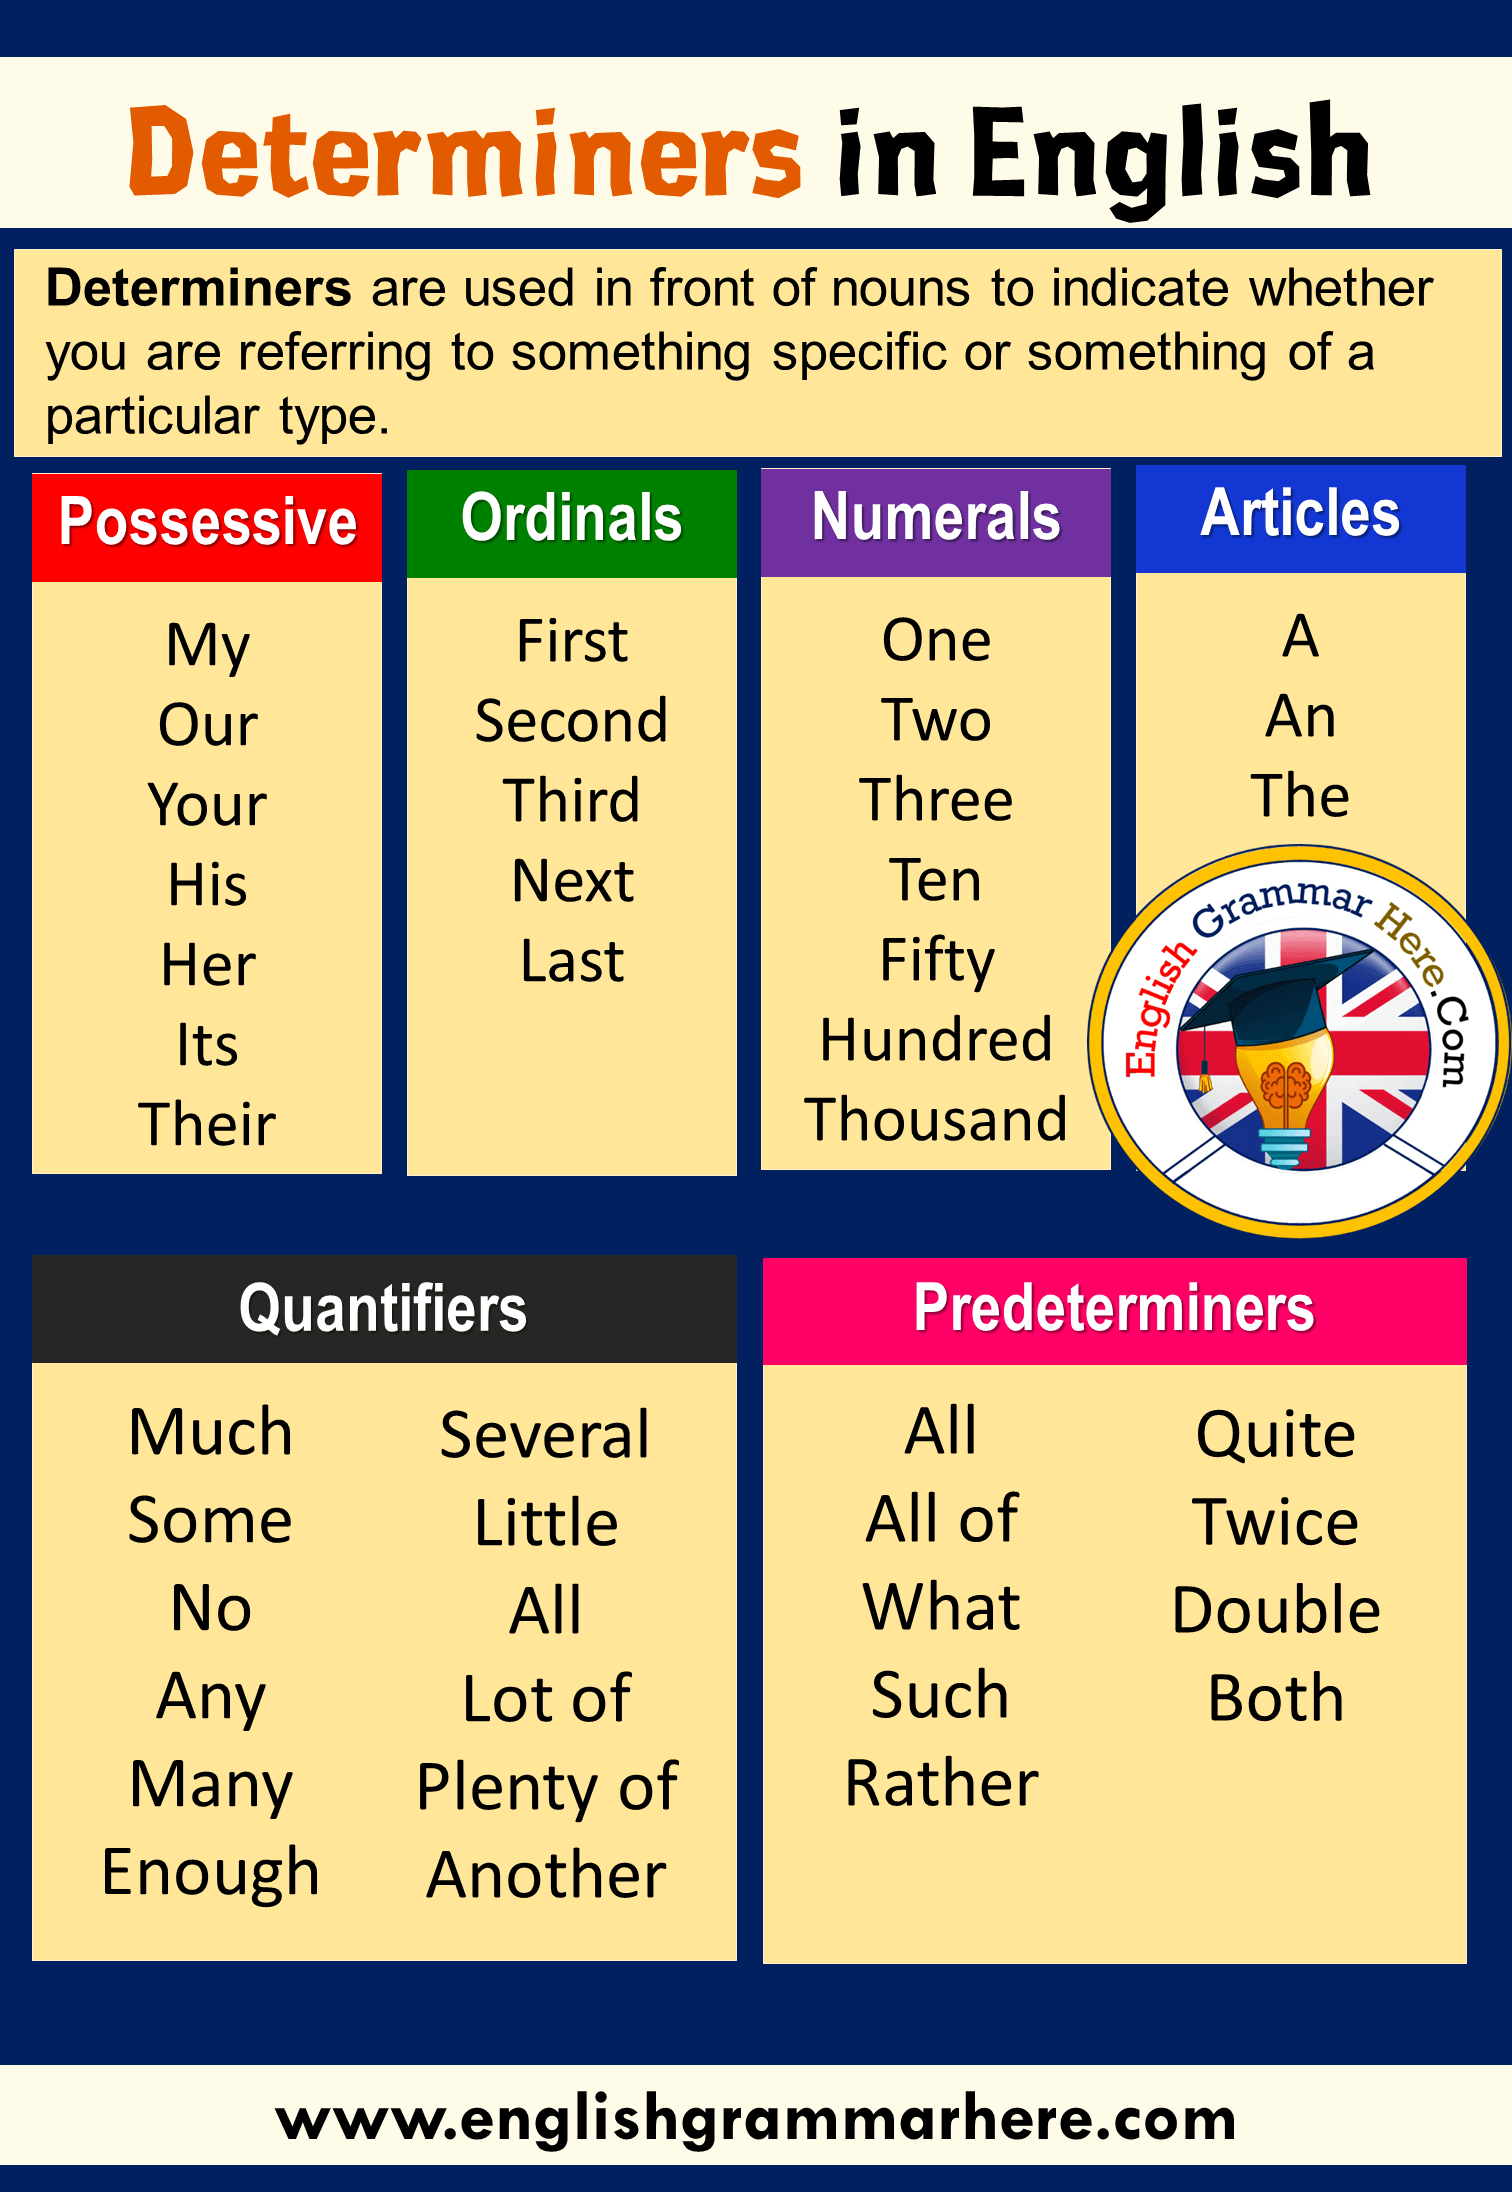 Determiners and Examples in English